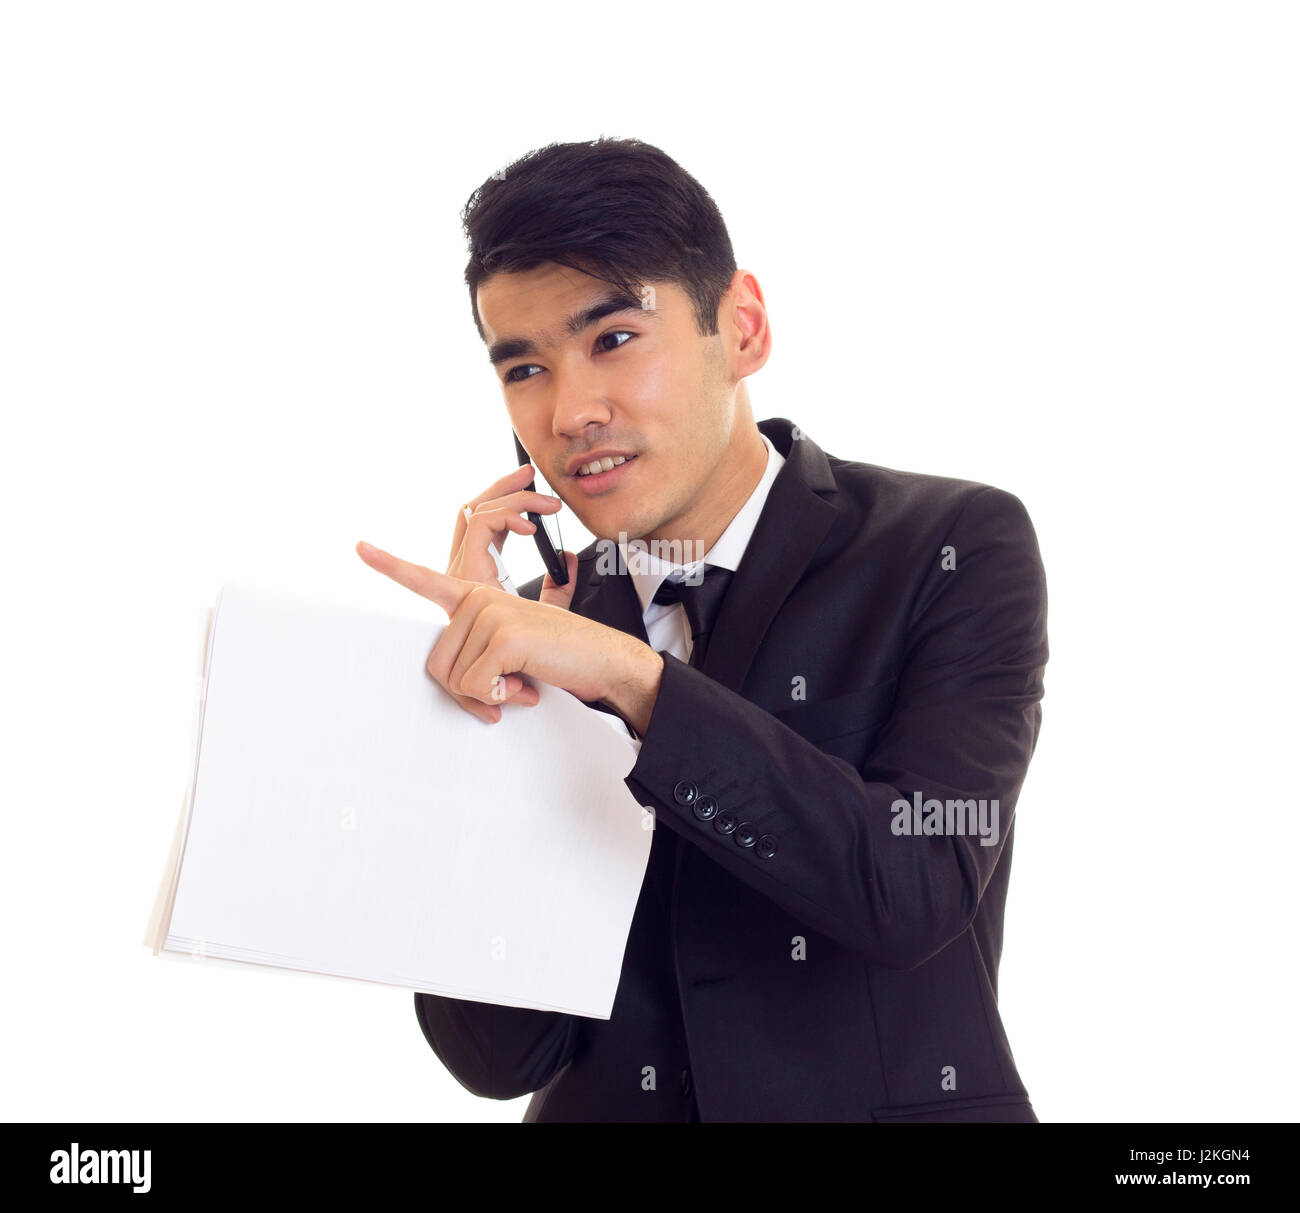 Arrogant young man with black hair in white shirt and black suit with tie  holding papers and talking on the phone on white background Stock Photo -  Alamy